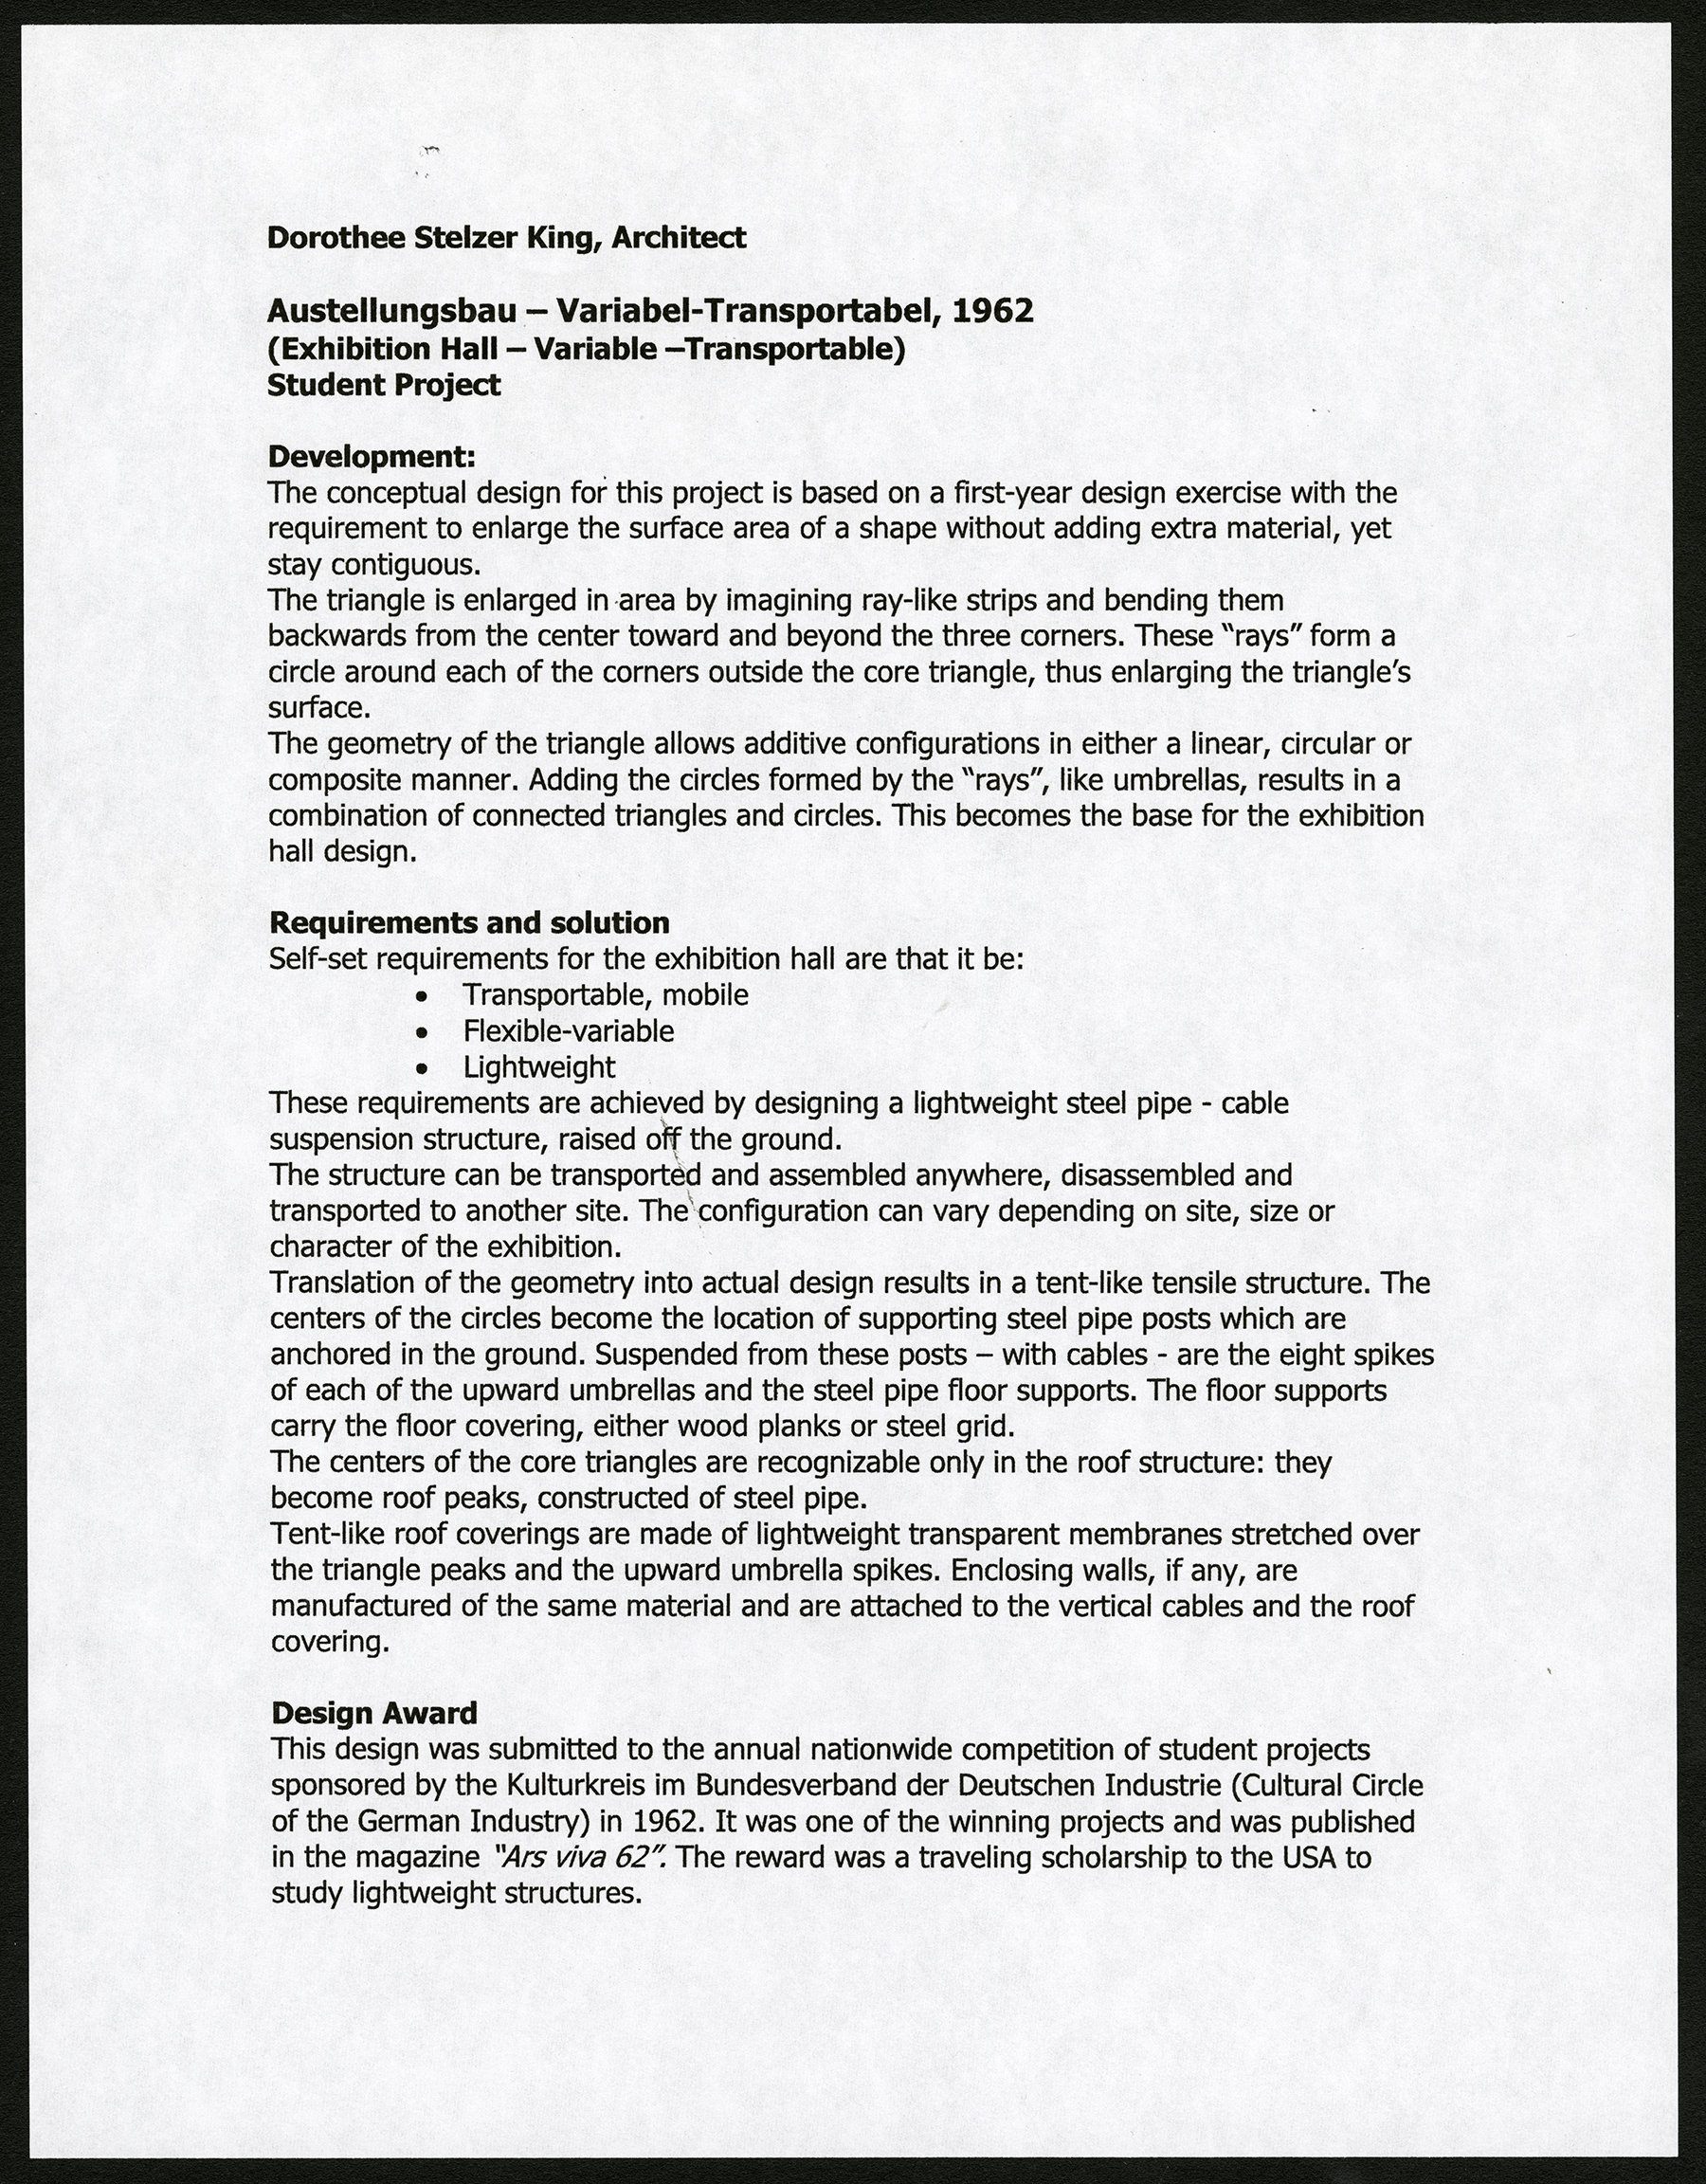 Document outlining requirements and development of the project.